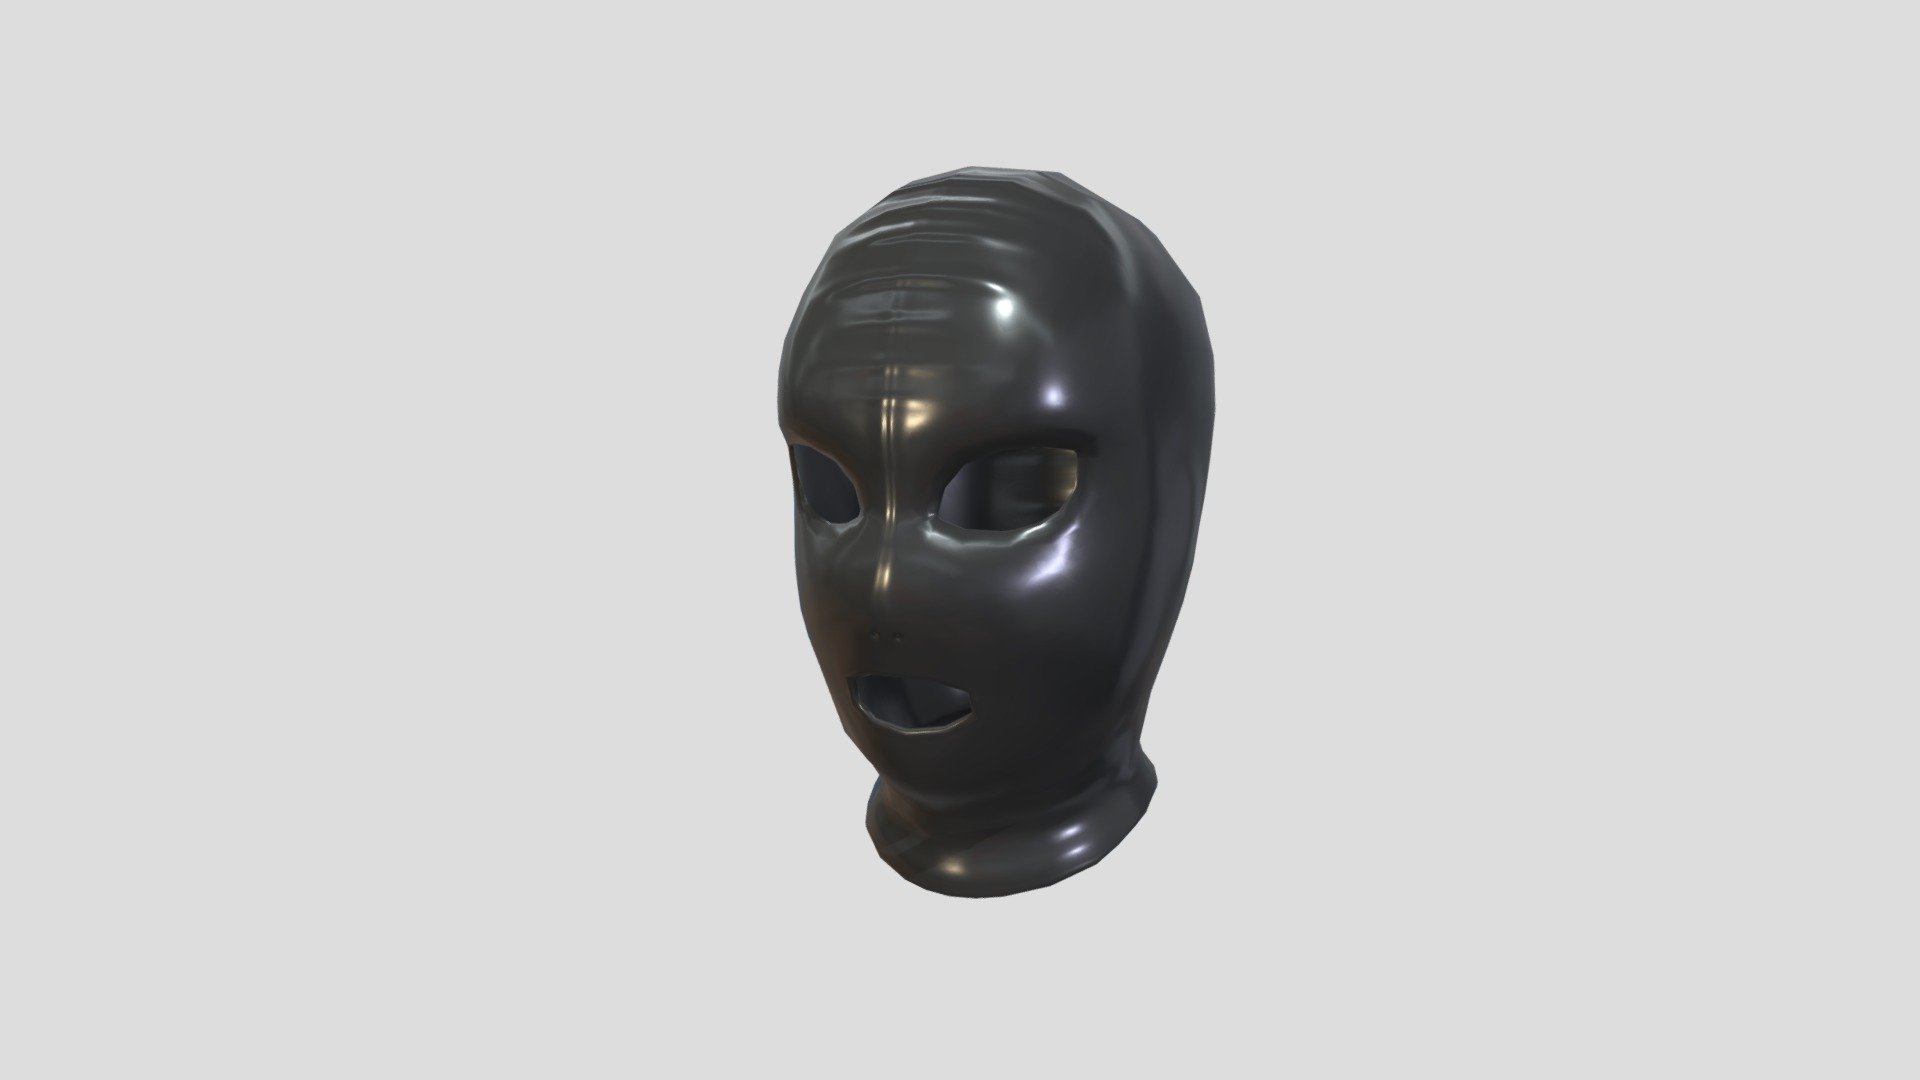 Latex Mask          

3d model.          


Ready for your Game, App, Animation, etc.          

File Format:          

-3ds Max 2022          

-FBX          

-OBJ          
   


PNG texture               

2048 x 2048                


- Diffuse                        

- Normal Map                            

- Roughness                         



Completely UVunwrapped.          

Non-overlapping.          


Clean topology 3d model